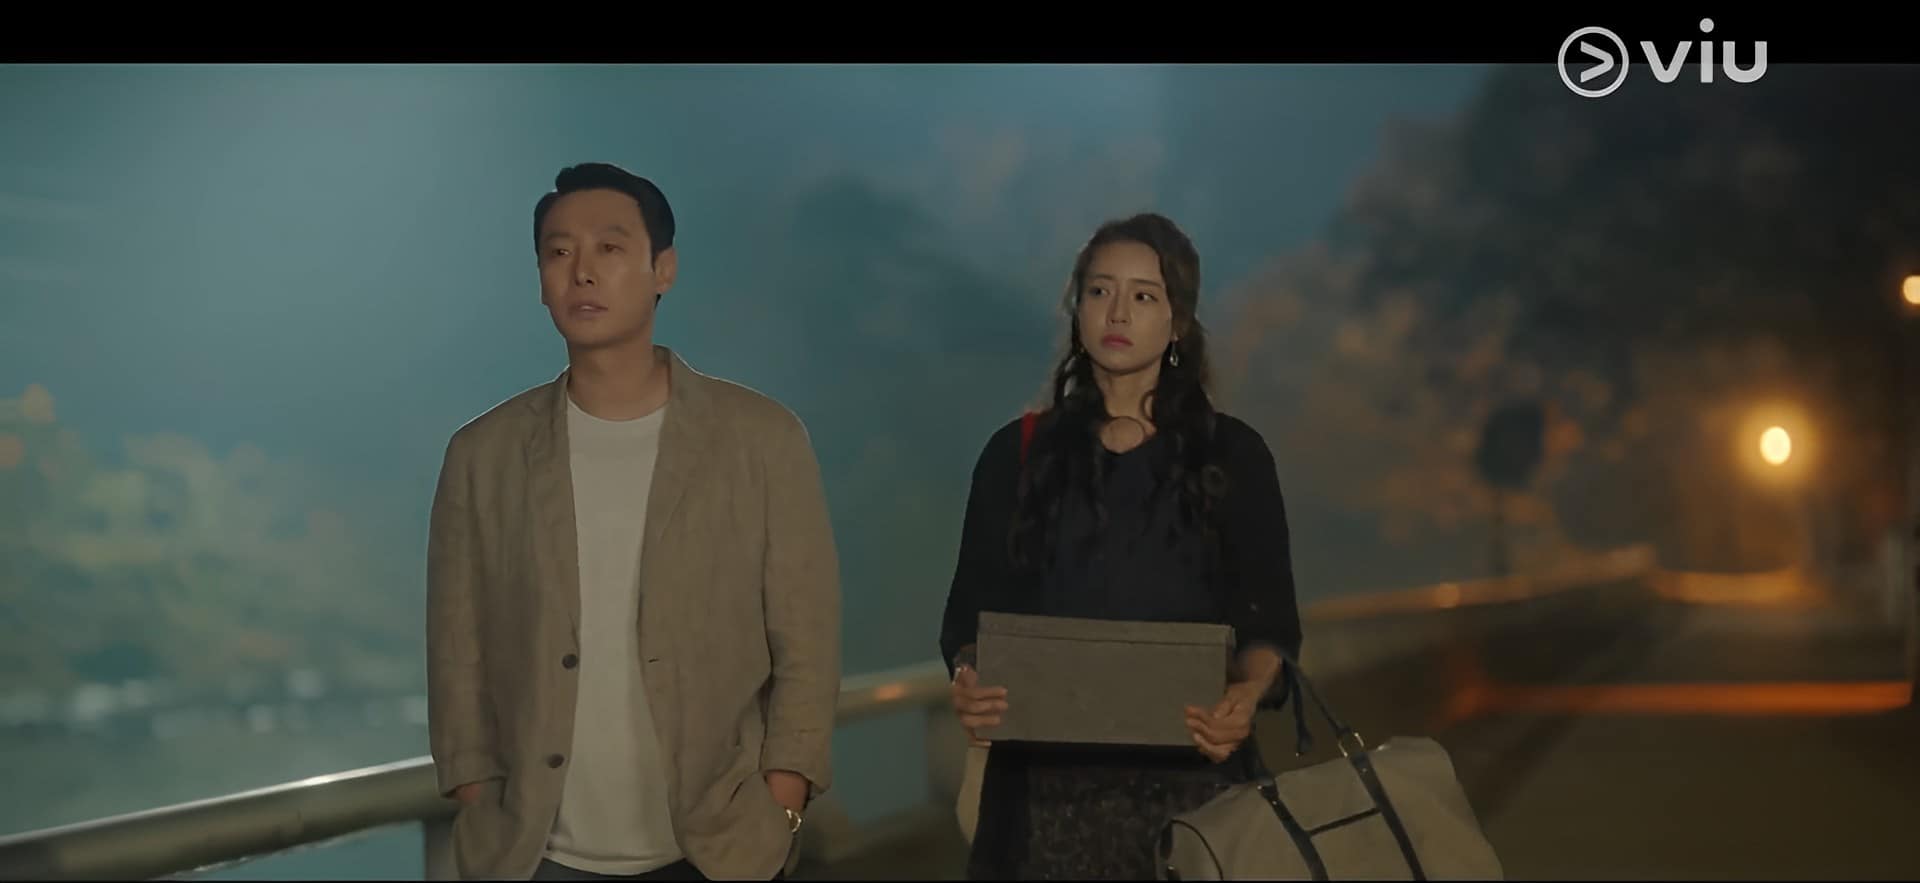 My Perfect Stranger Episode 15: Release Date, Preview & Streaming Guide